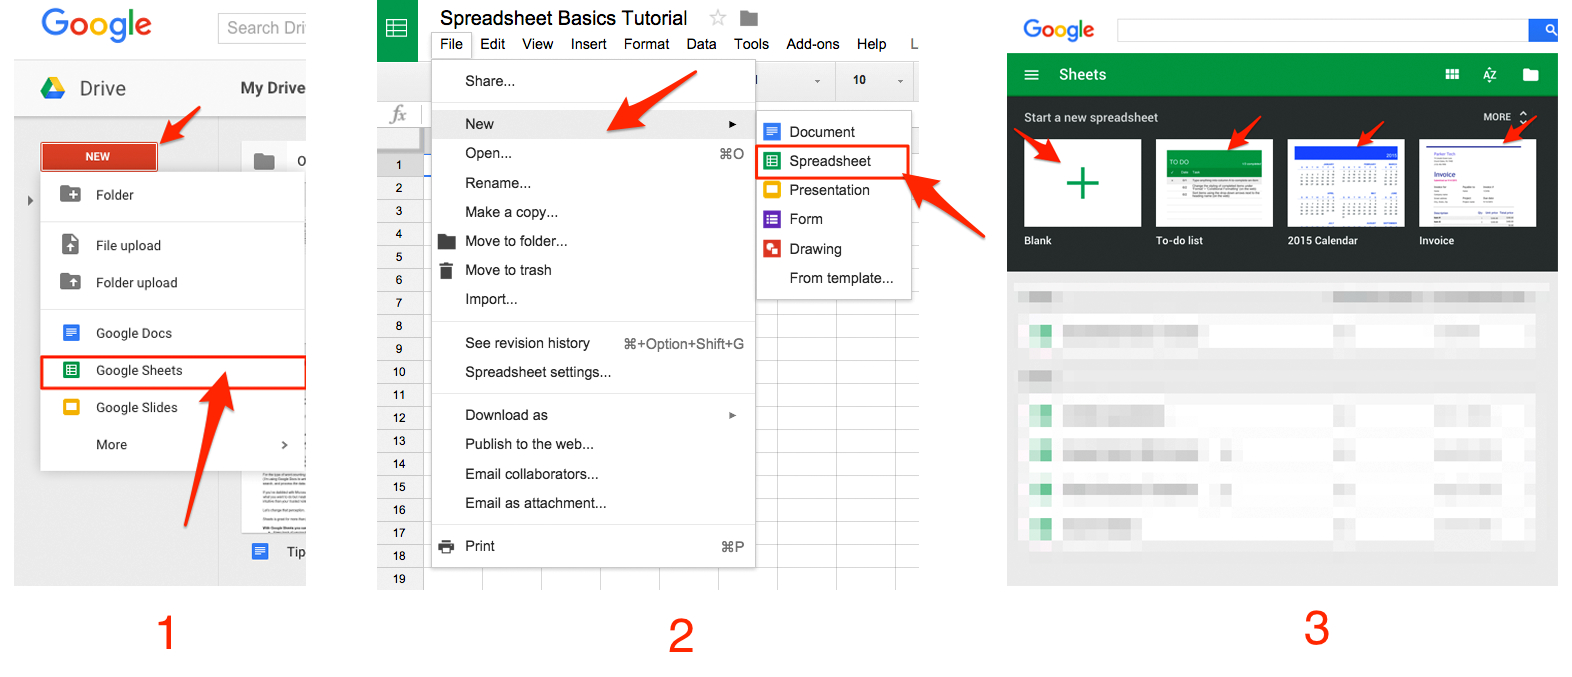 Spreadsheets Google Com Regarding Google Sheets 101: The Beginner's Guide To Online Spreadsheets  The